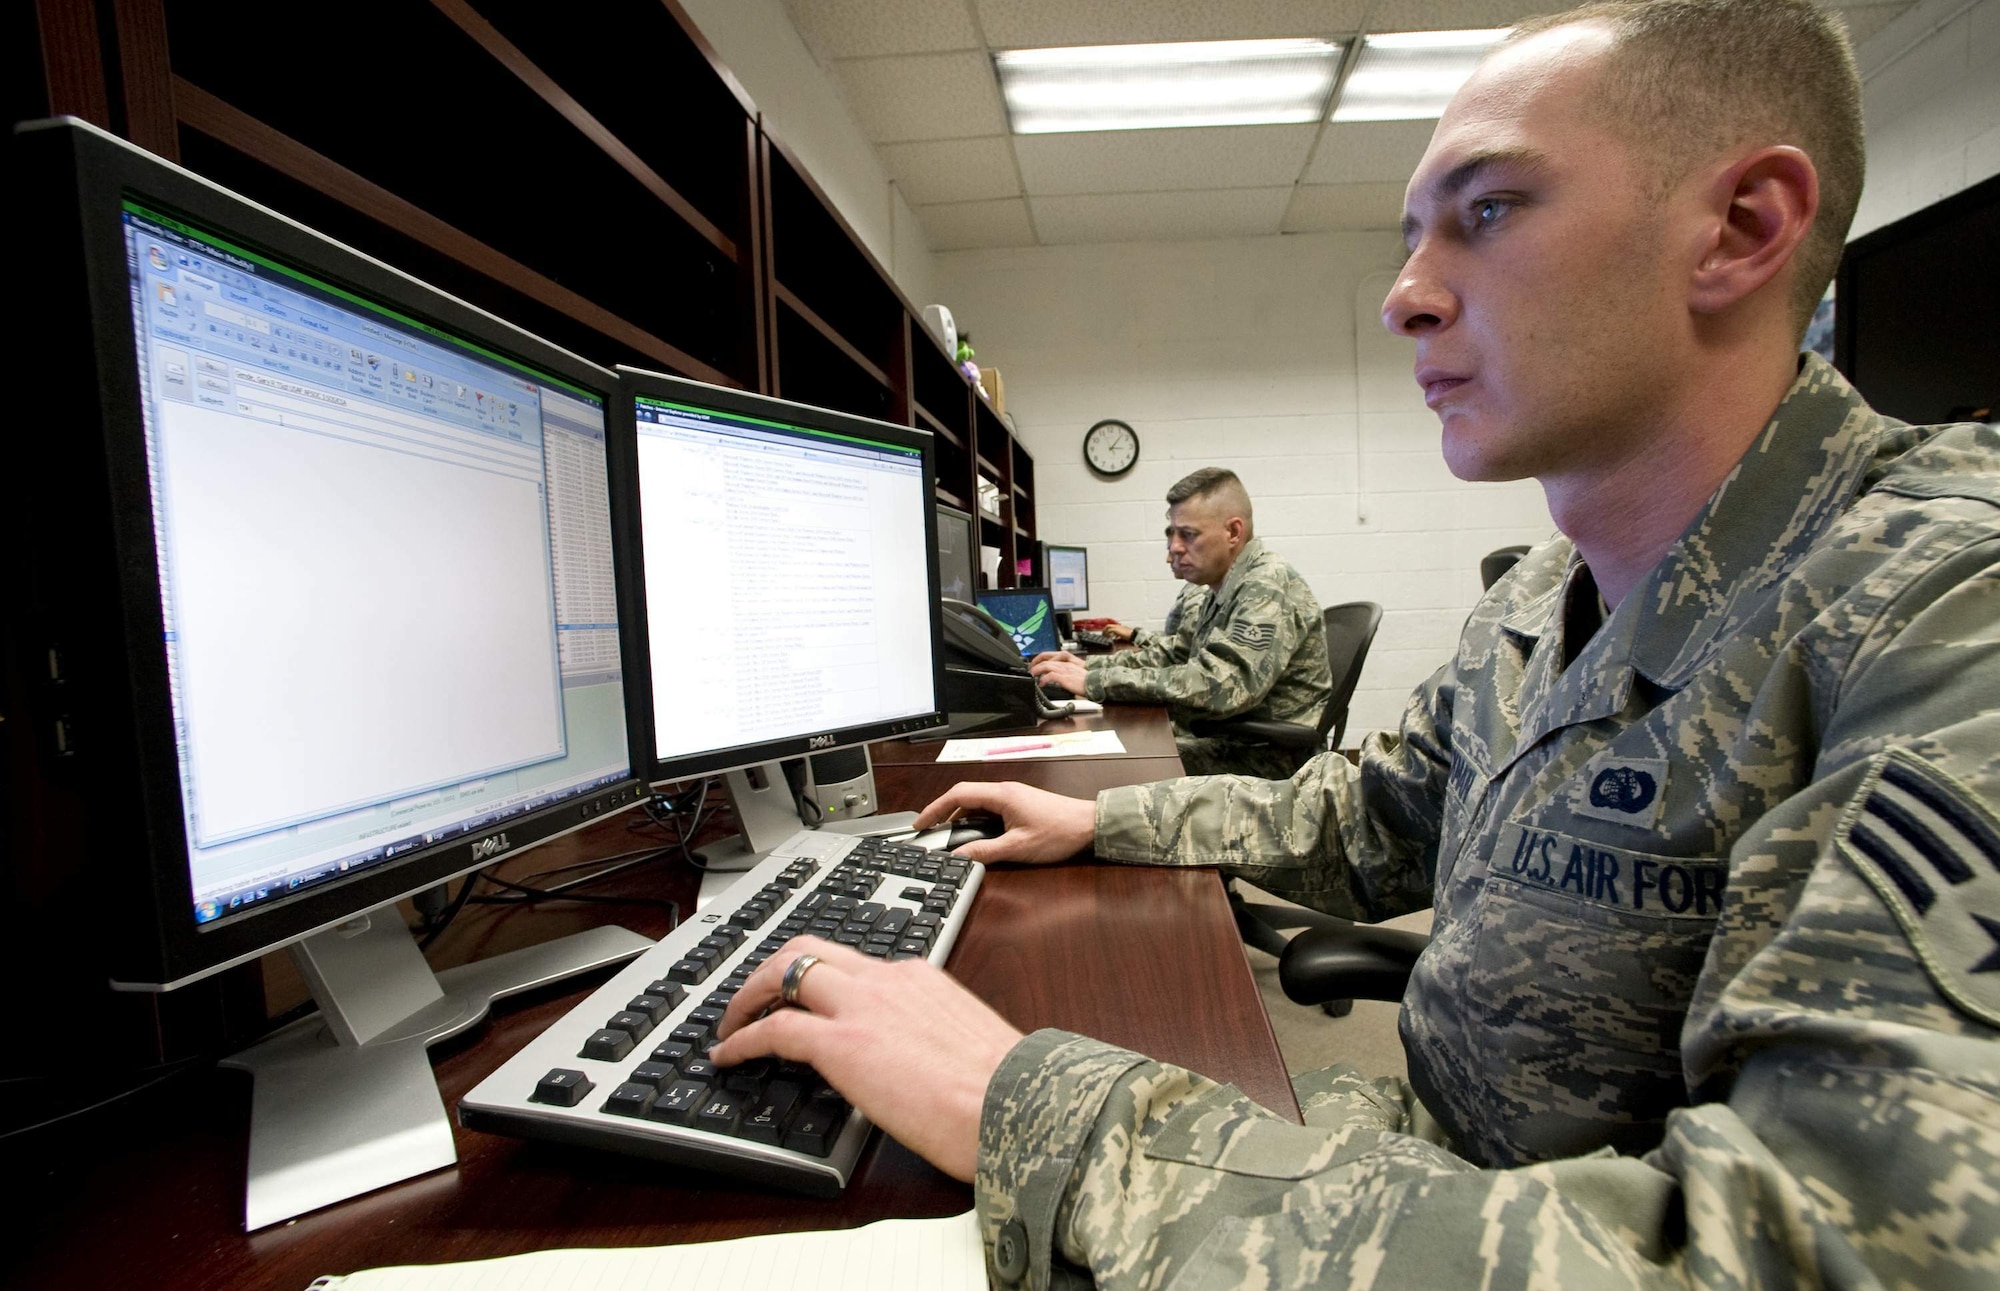 Senior Airman Kyle Stackman (front) and Tech. Sgt. James Thoni with the Information Protection Operations office at Nellis Air Force Base, Nev., monitor the base's computer network to keep it secure.  Airman Stackman is an information protection operations journeyman with the 99th Communication Squadron and Sergeant Thoni is an information protection operations technician on temporary duty to Nellis from the 28th Communications Squadron at Ellsworth AFB, S.D.  (U.S. Air Force photo/Master Sgt. Jack Braden)